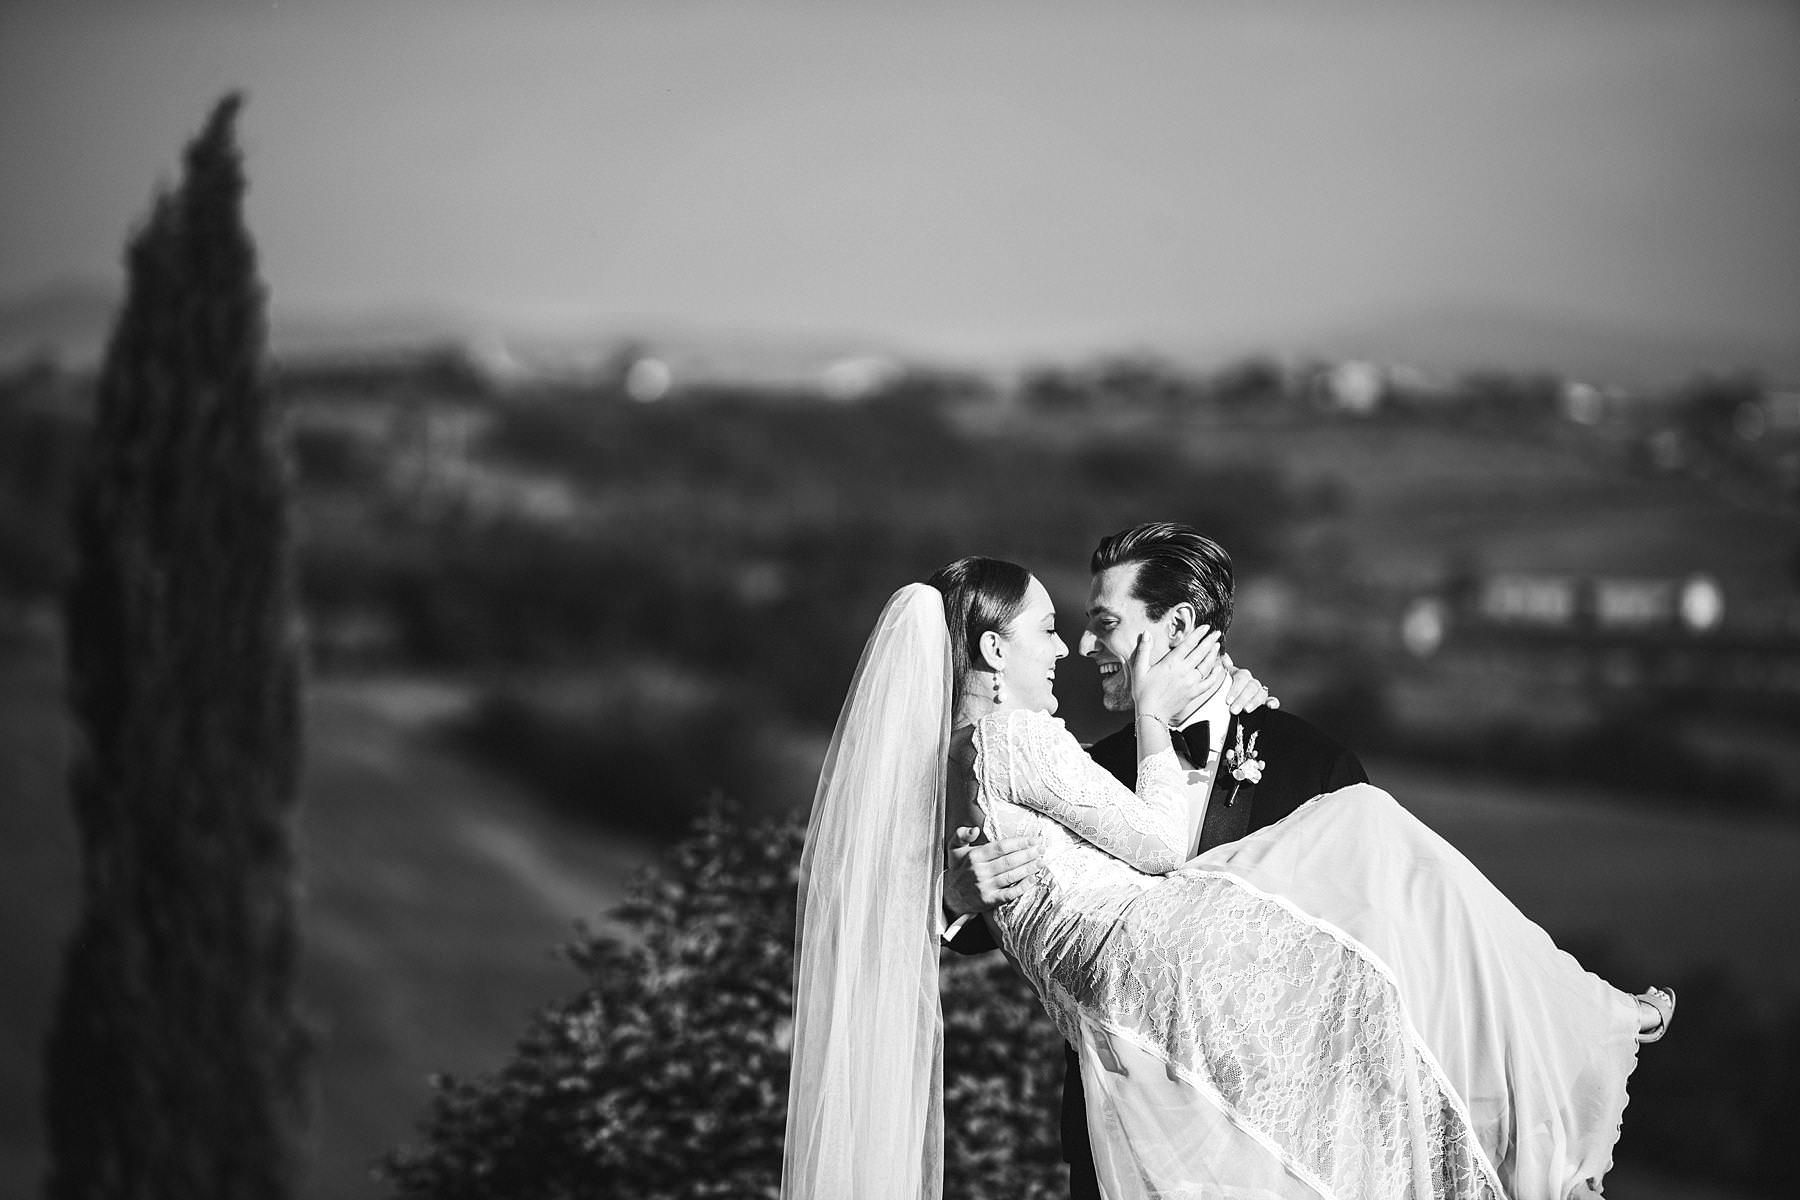 Destination wedding at Villa l'Antica Posta, elegance and fun in a nutshell. Exciting and genuine wedding portrait in the amazing landscape of Umbria